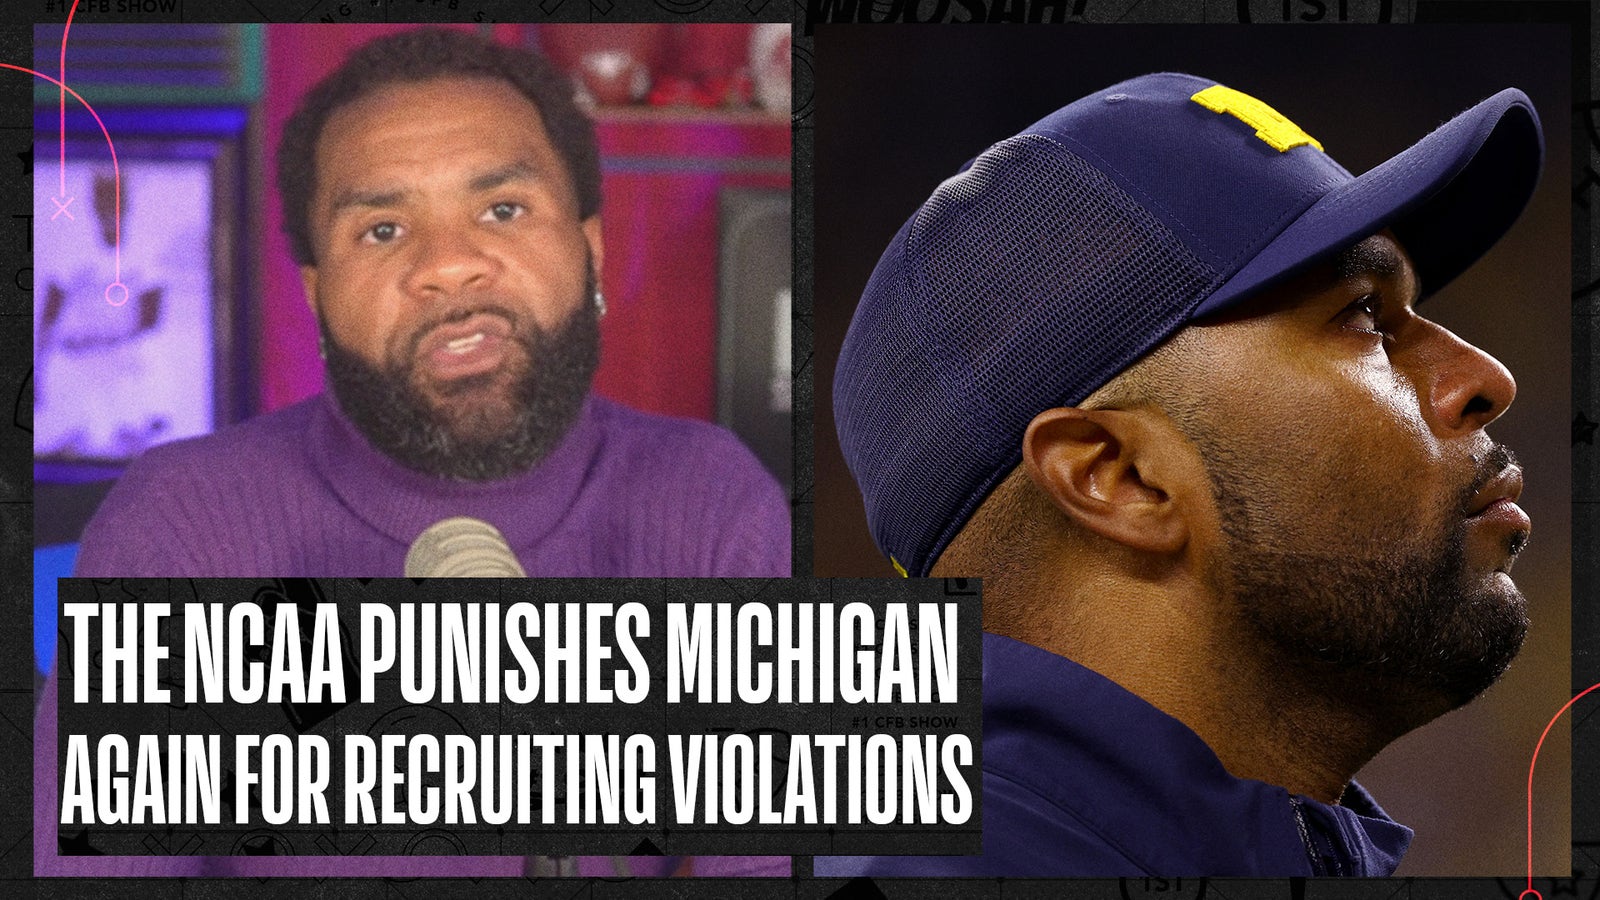 The NCAA punishes Michigan for more recruiting violations